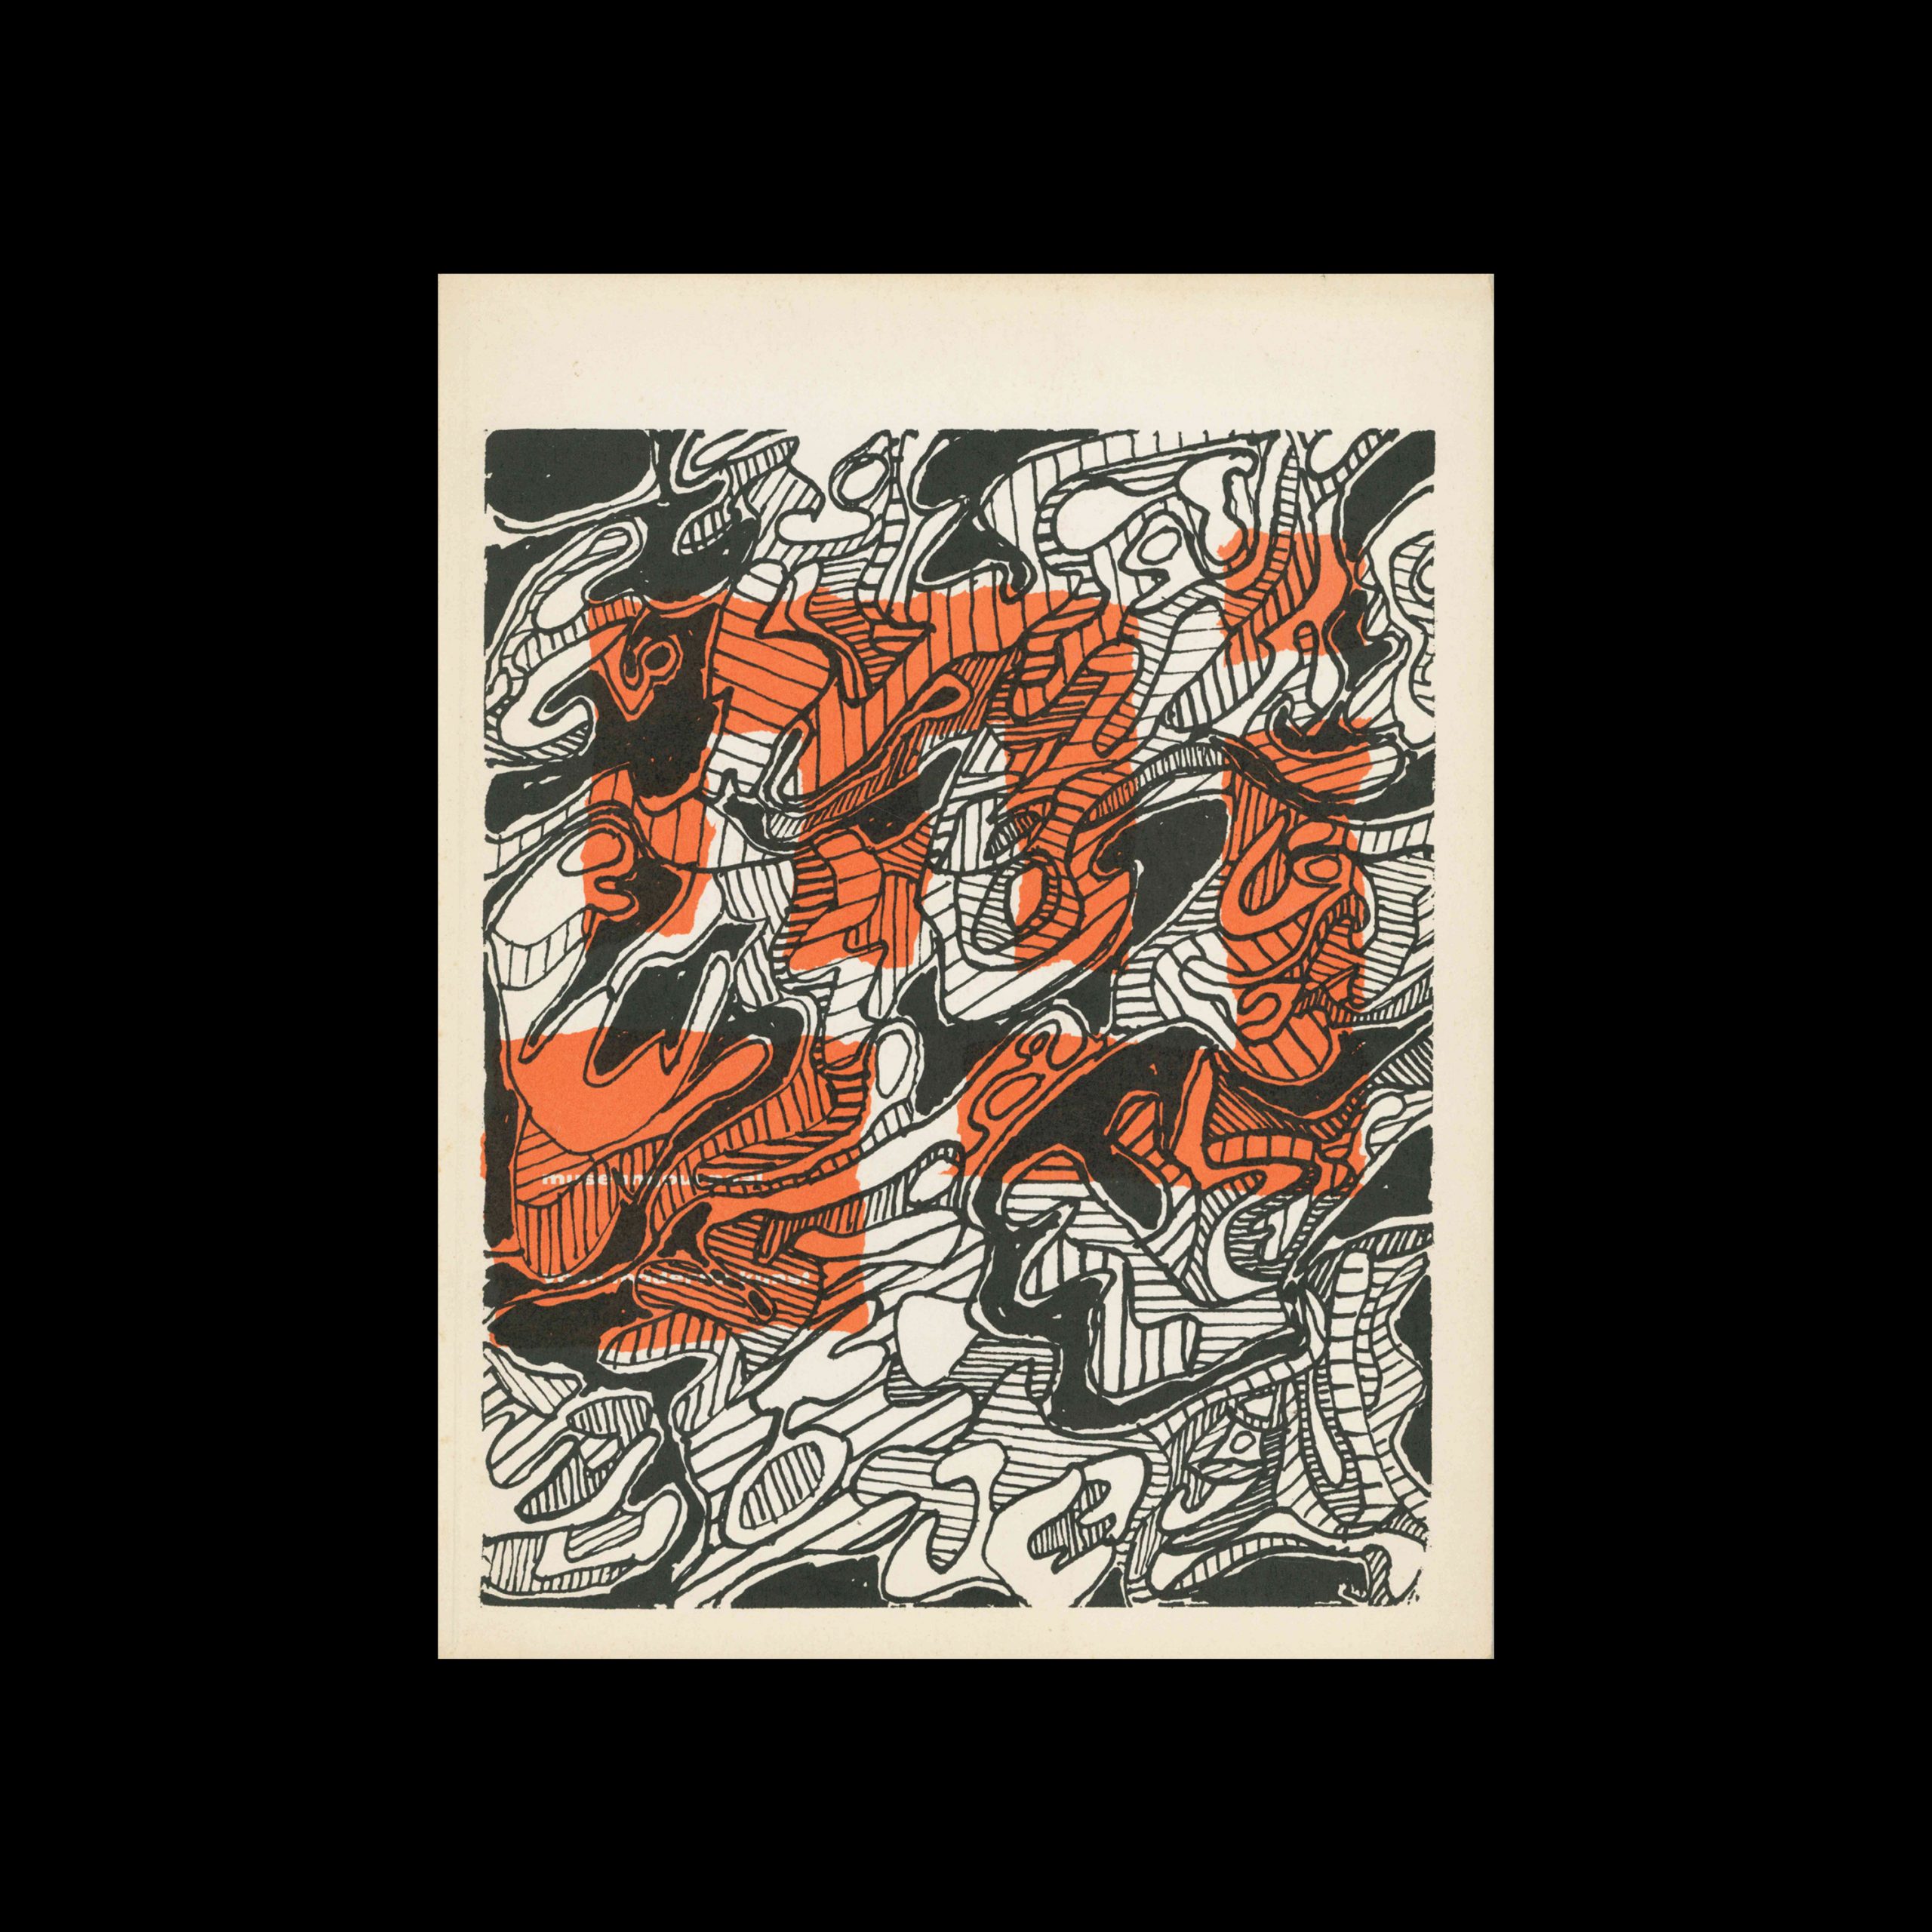 Museumjournaal, Serie 9 no4, 1963. Cover illustration by Jean Dubuffet.